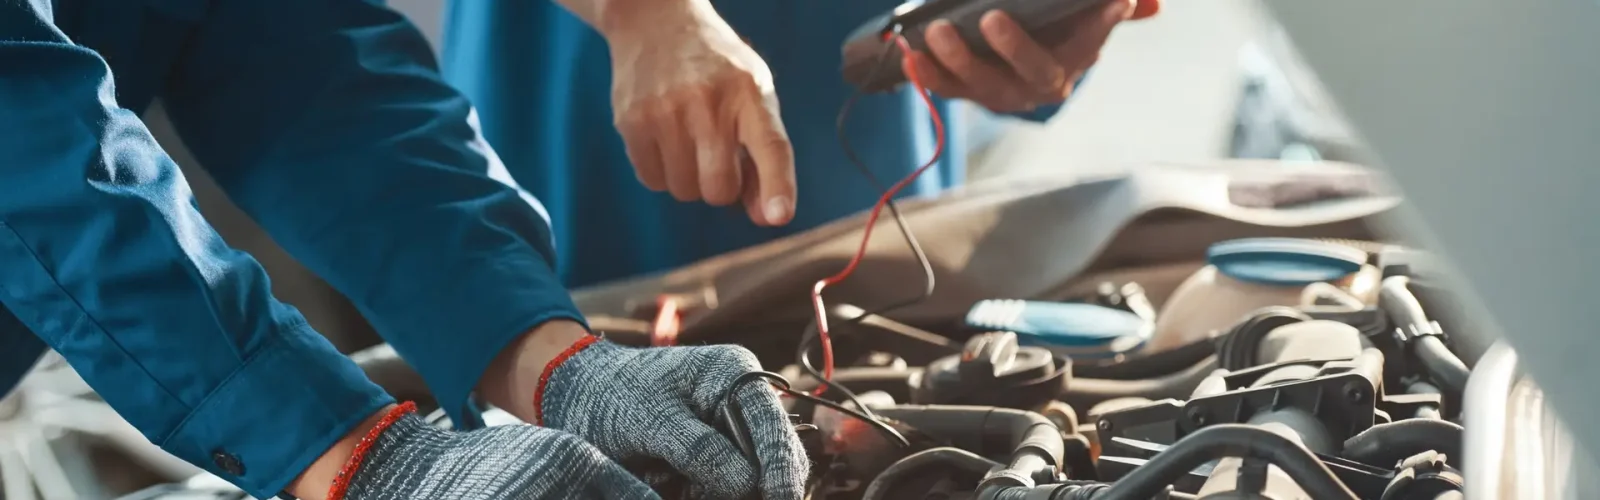 Roadside Battery Replacement Testing car battery